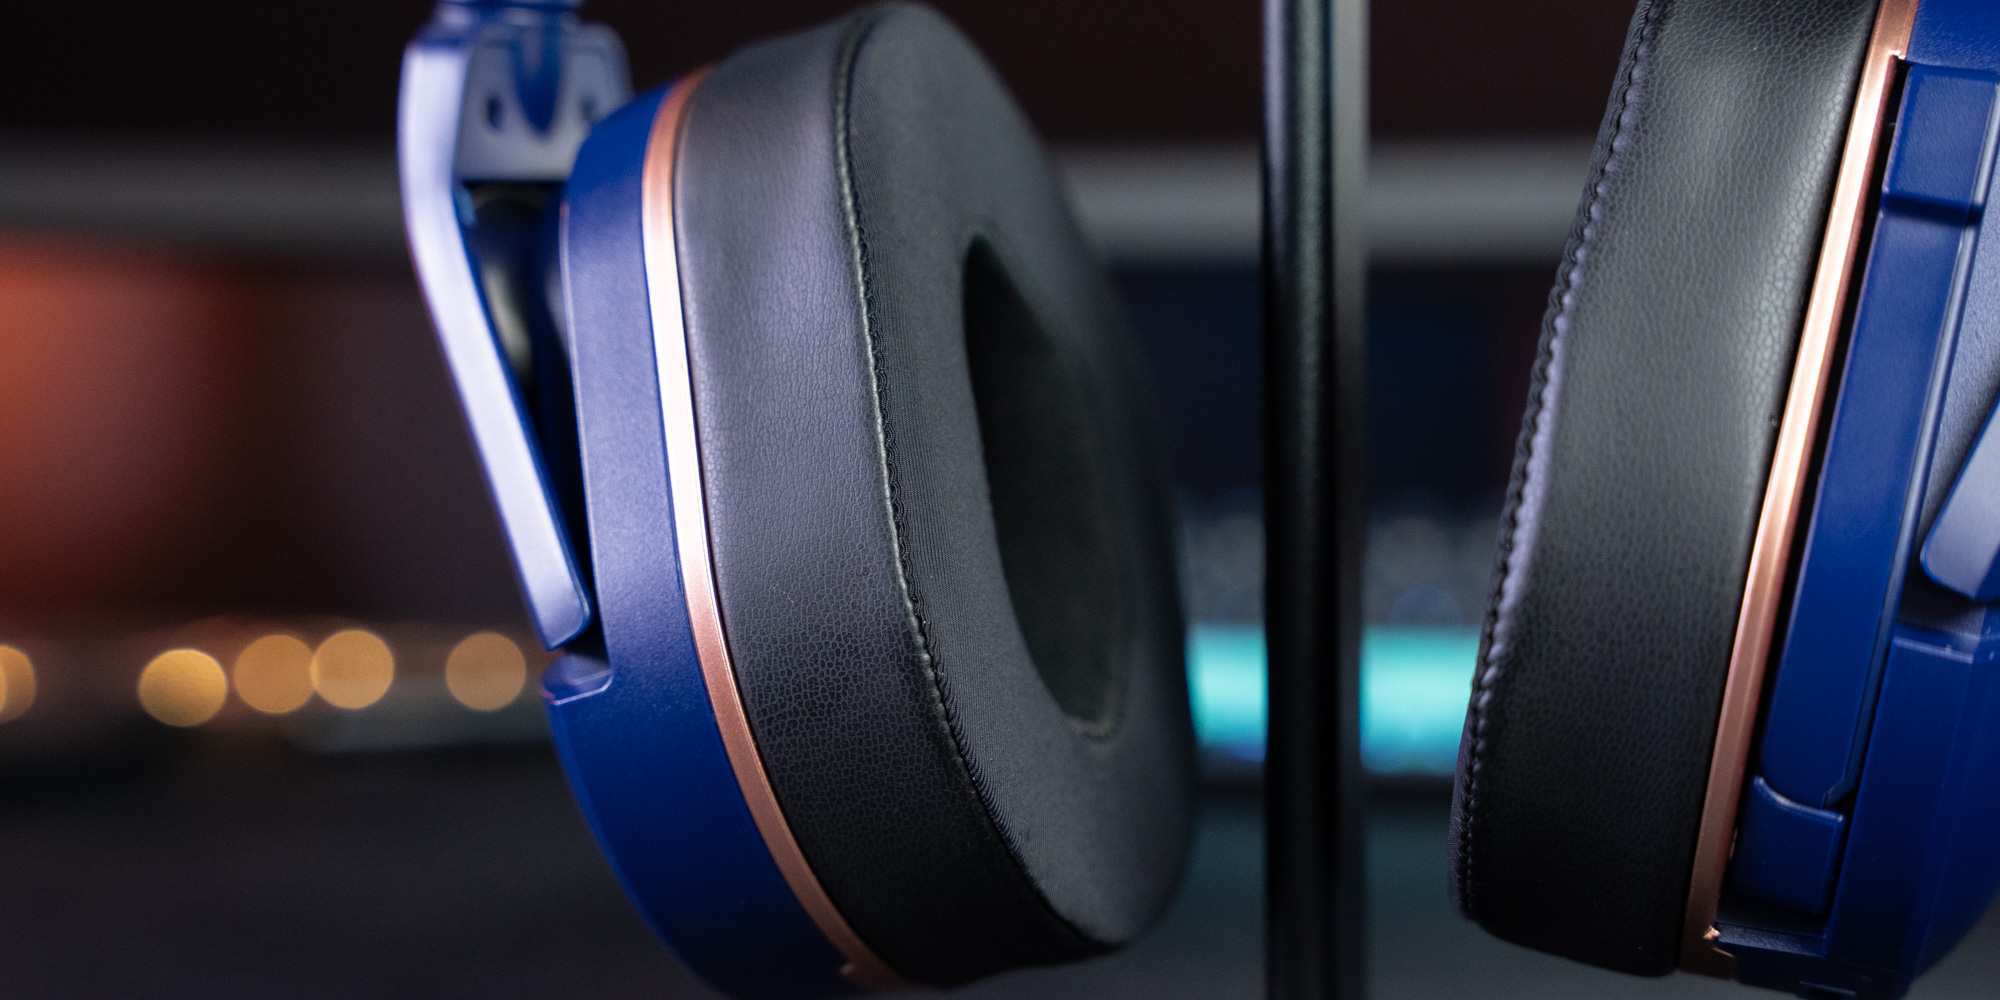 Stealth 700 Gen 2 Max Review: Turtle Beach delivers huge compatibility